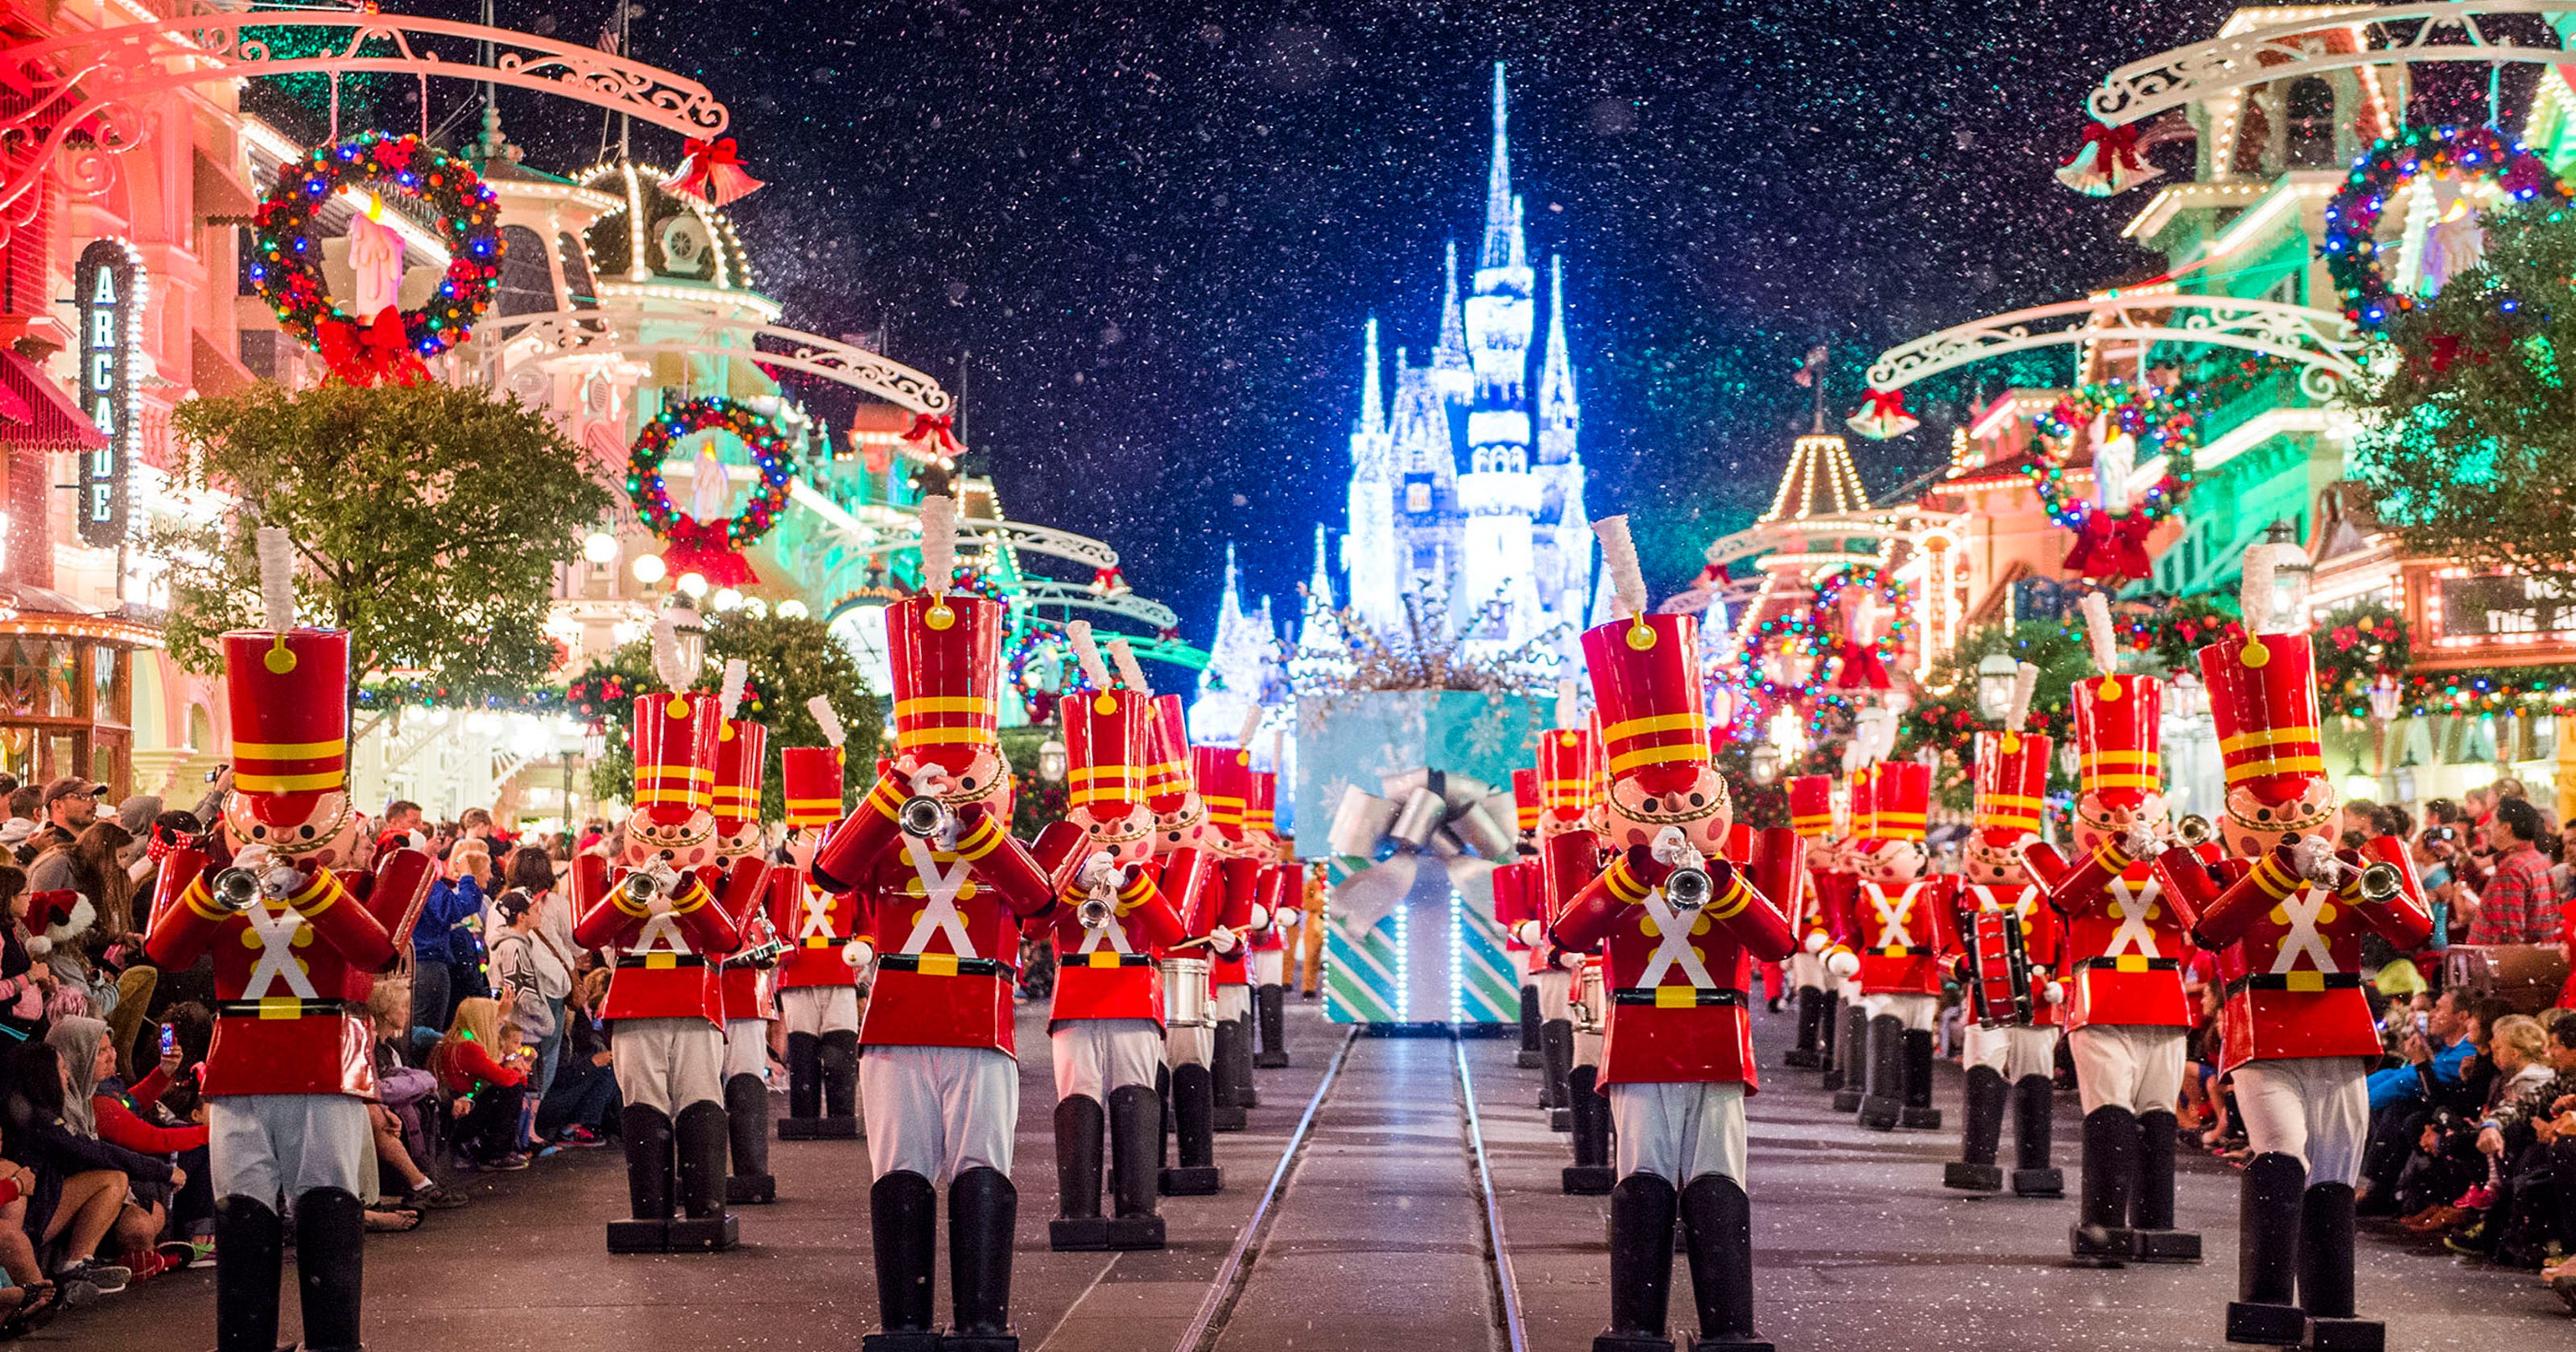 Disney World transformed for Christmas See all the decorations